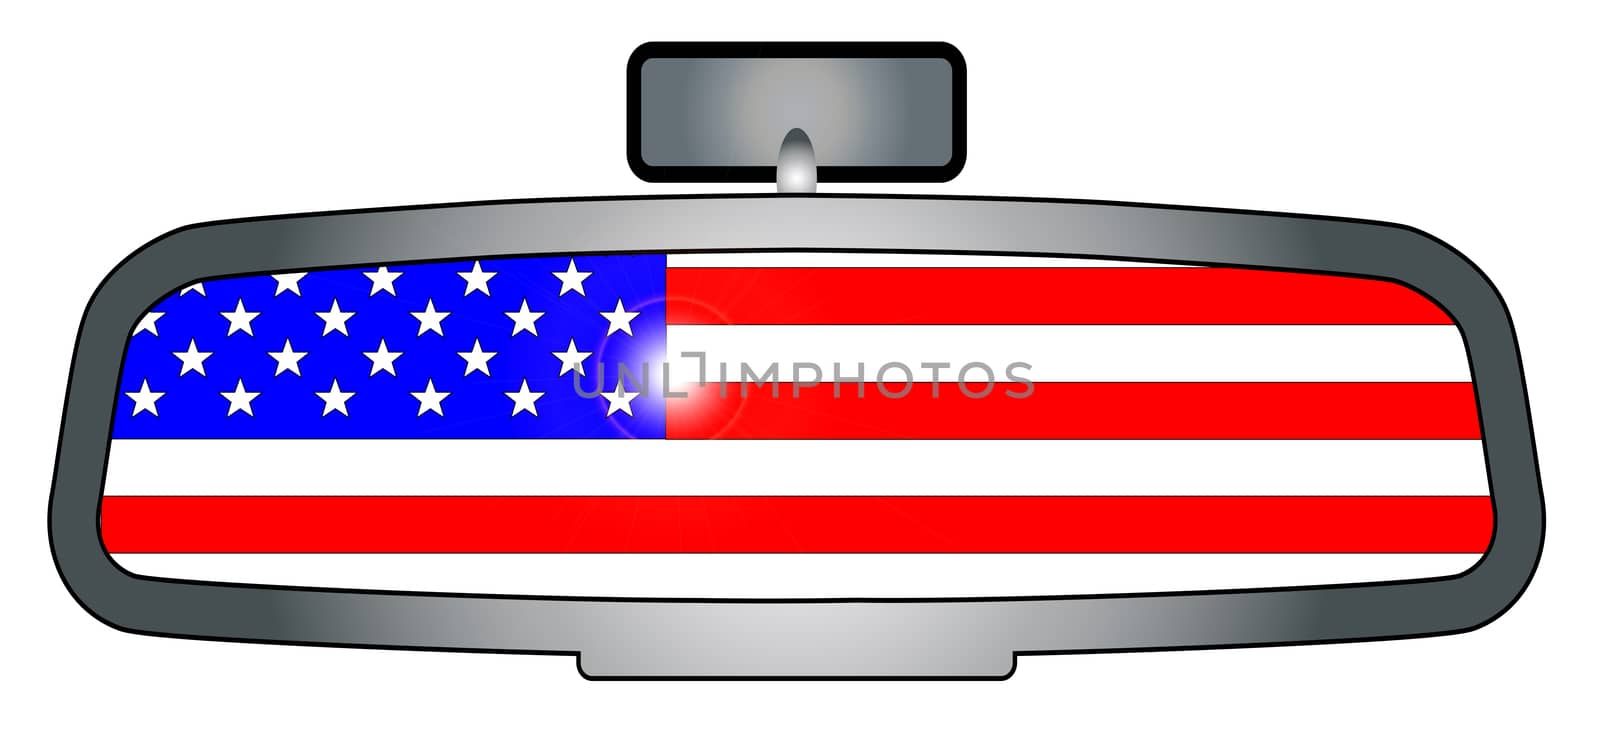 A vehicle rear view mirror with the flag of the United States of America